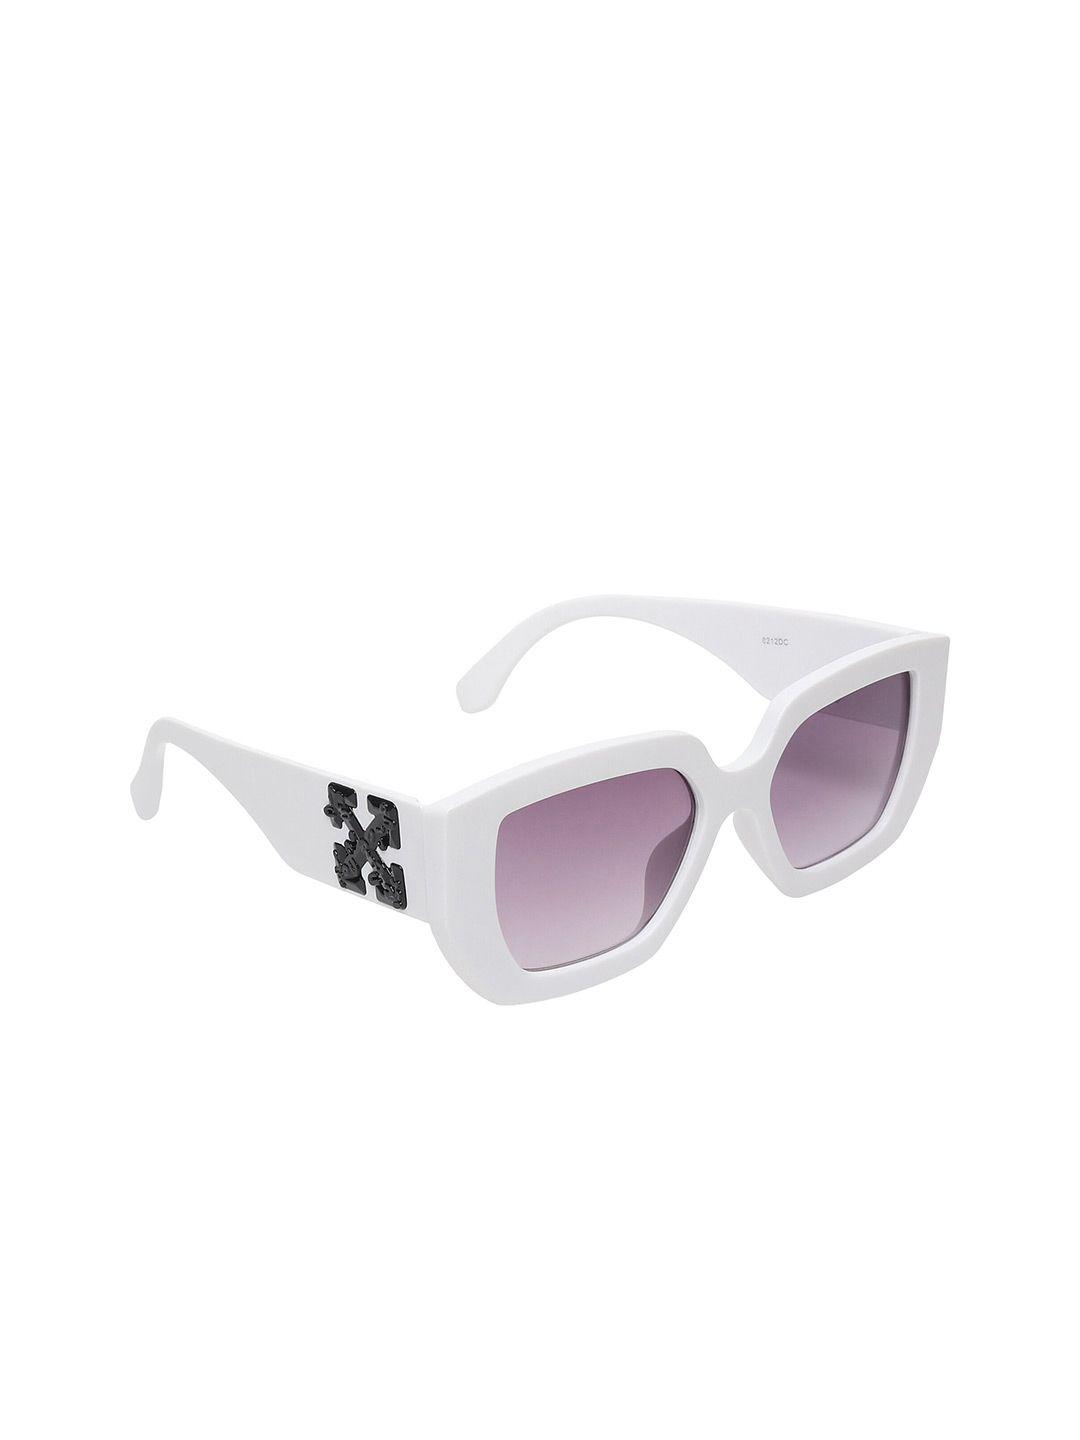 swiss design unisex other sunglasses with uv protected lens